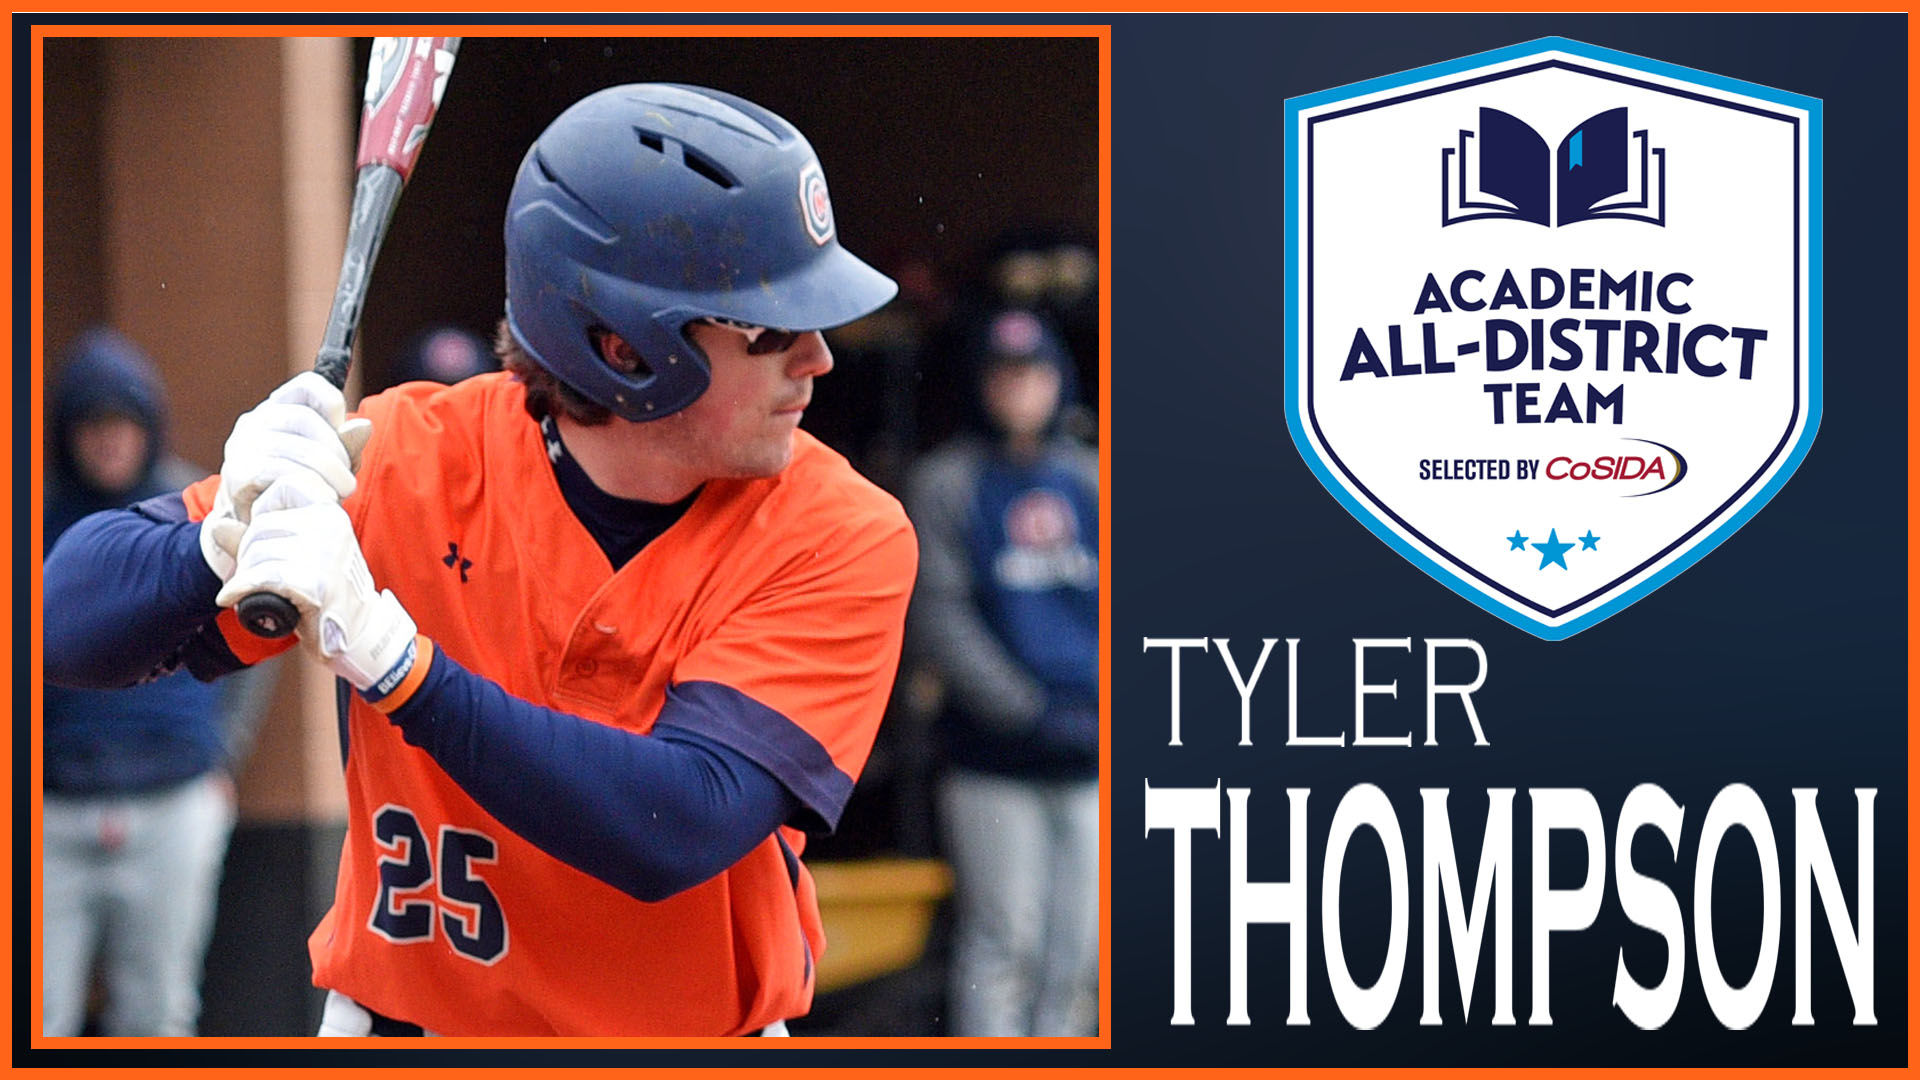 Thompson joins lineage of CoSIDA Academic All-District honorees